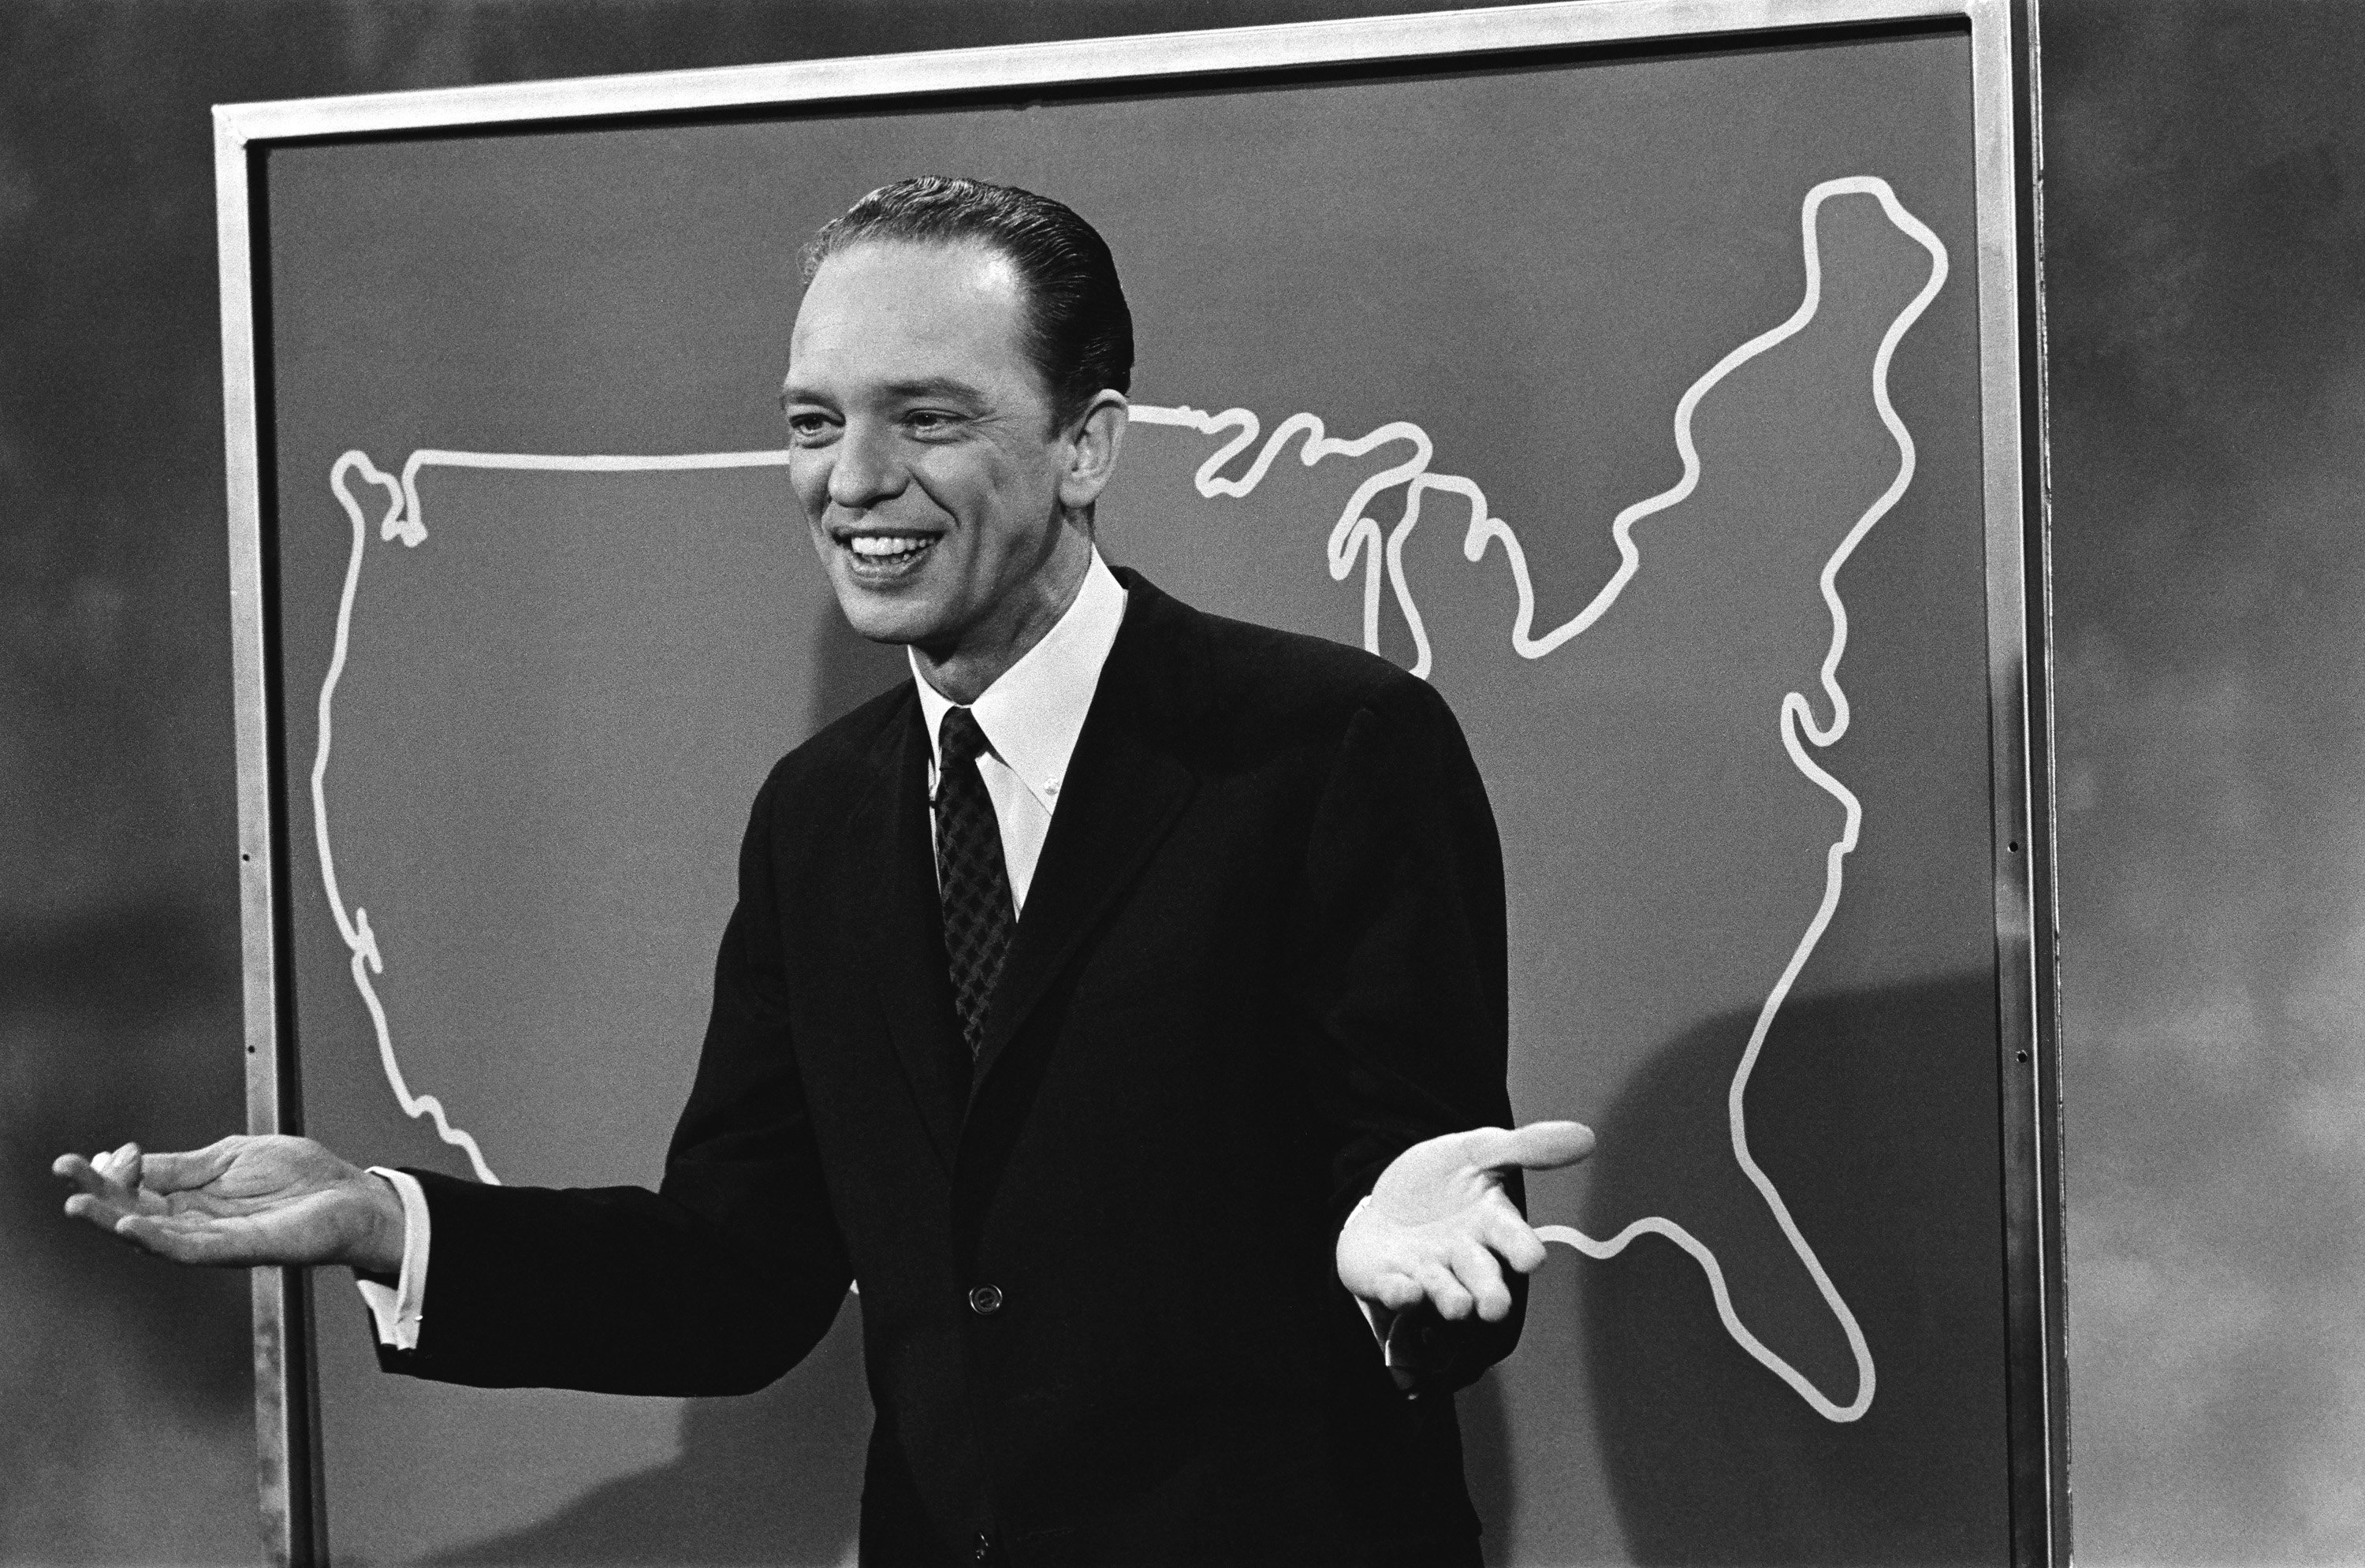 Don Knotts of The Andy Griffith Show in front of an outline of the United States